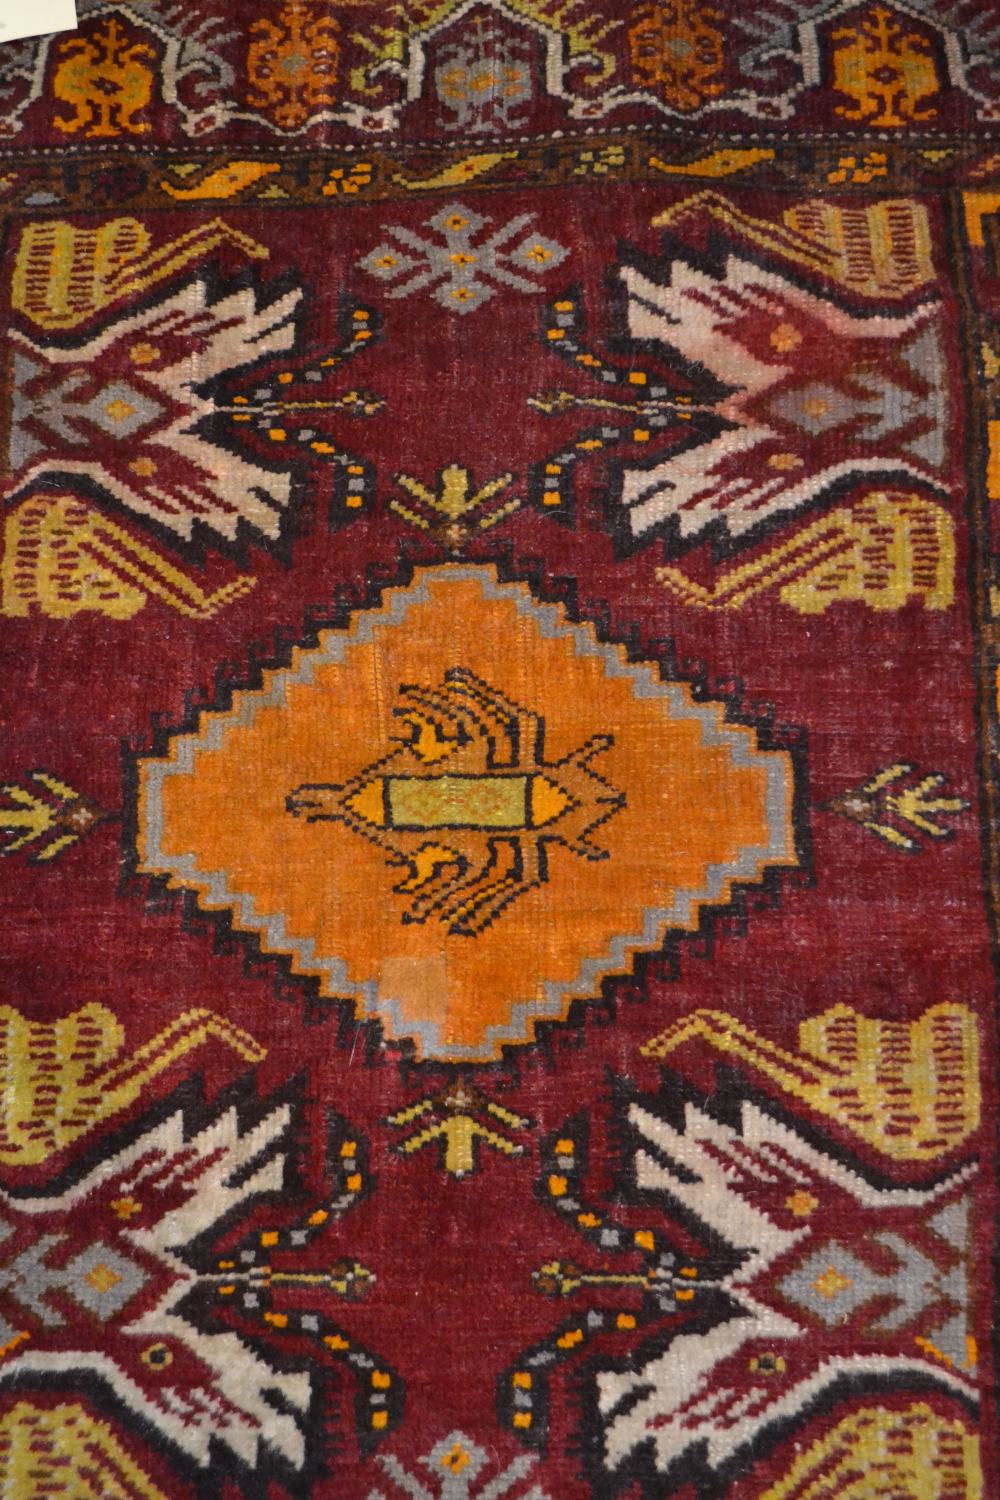 Kirshehir yastik, central Anatolia, late 19th century, 3ft. 2in. x 1ft. 11in. 0.97m. x 0.59m. - Image 2 of 5